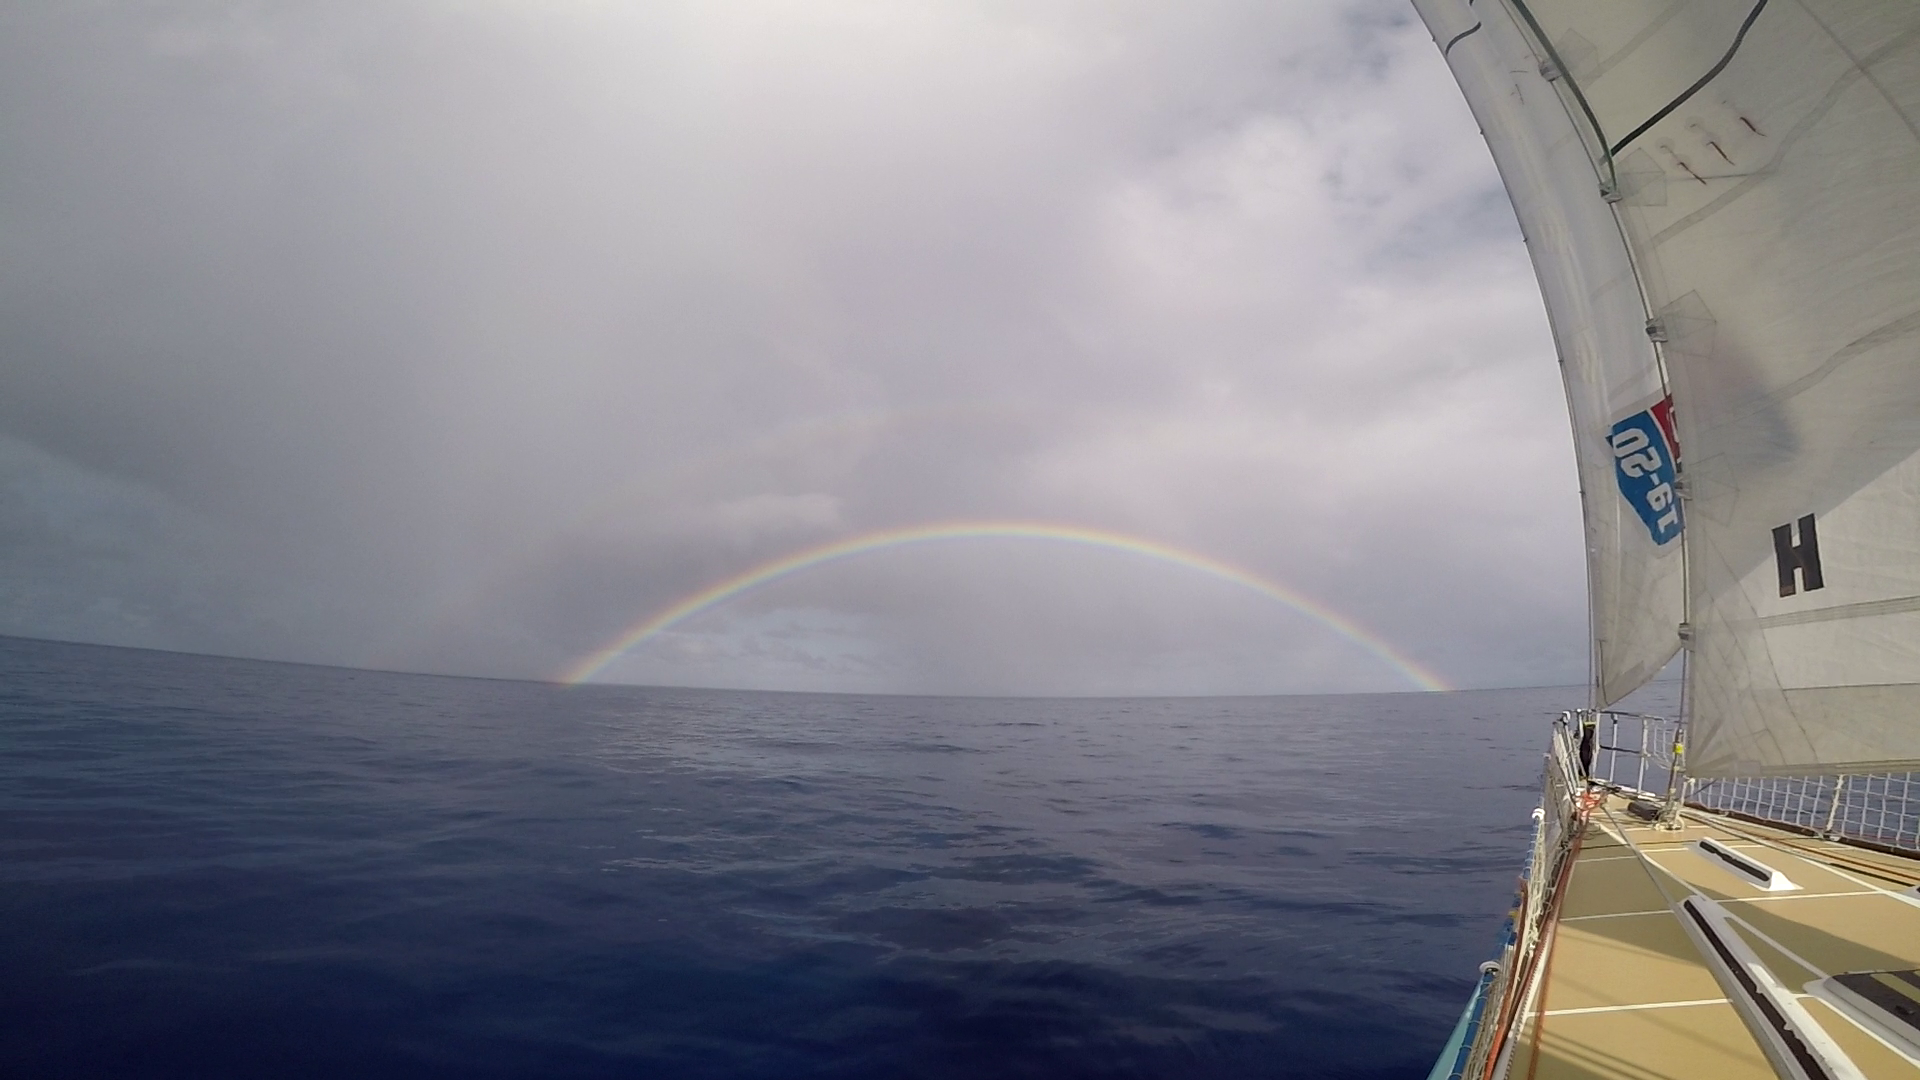 Go To Bermuda had the pleasure of seeing a rainbow after the rainshower